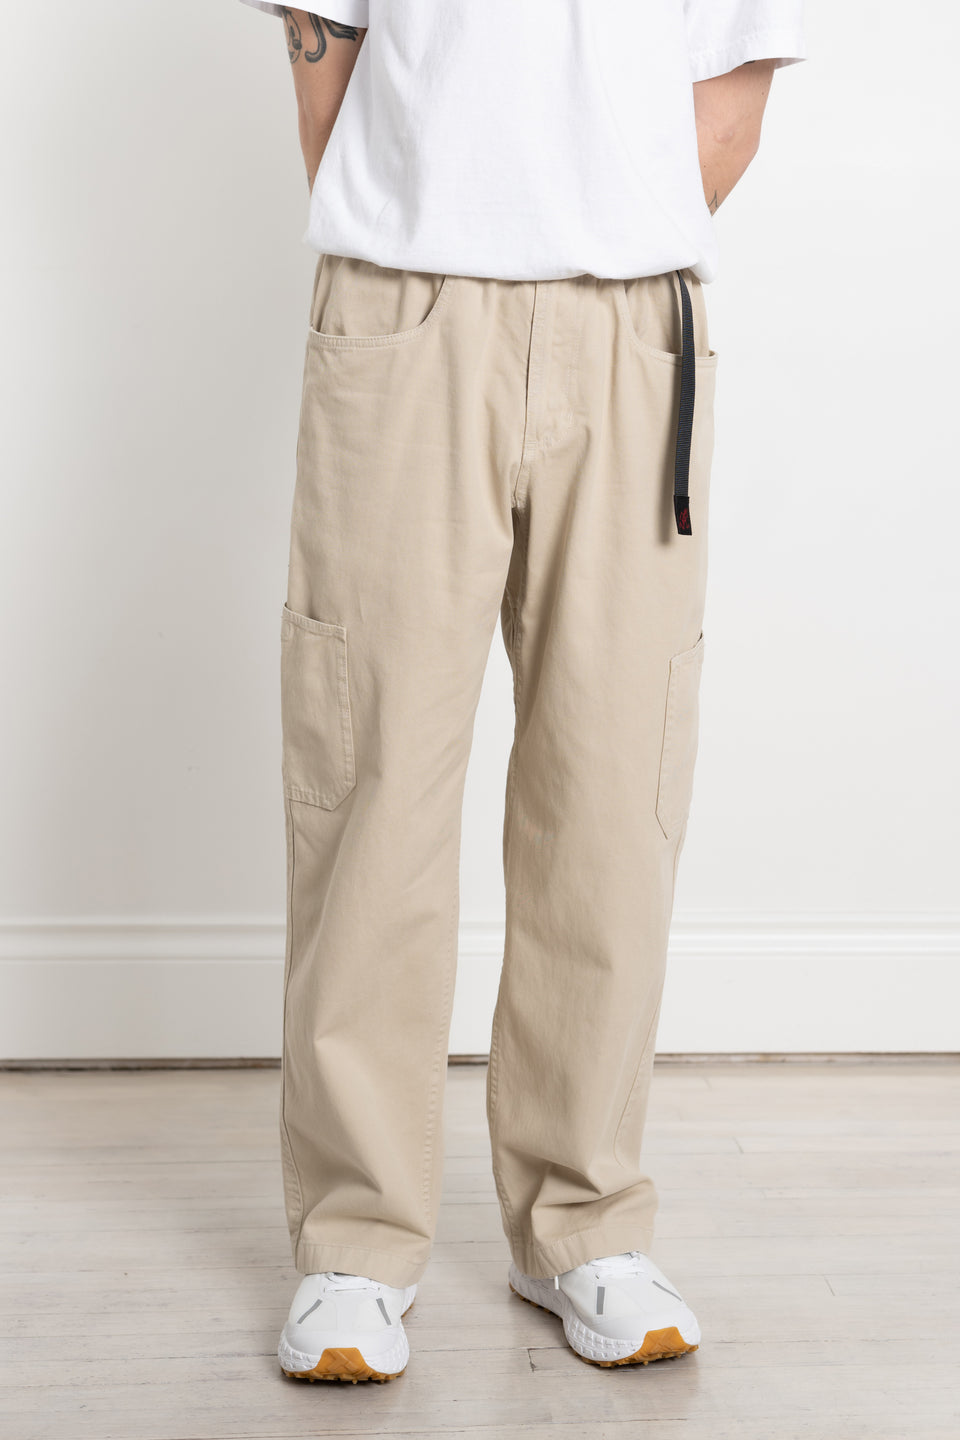 Gramicci Japan SS24 Men's Collection Calculus Clothing Online Canada Rock Slide Pant Chino